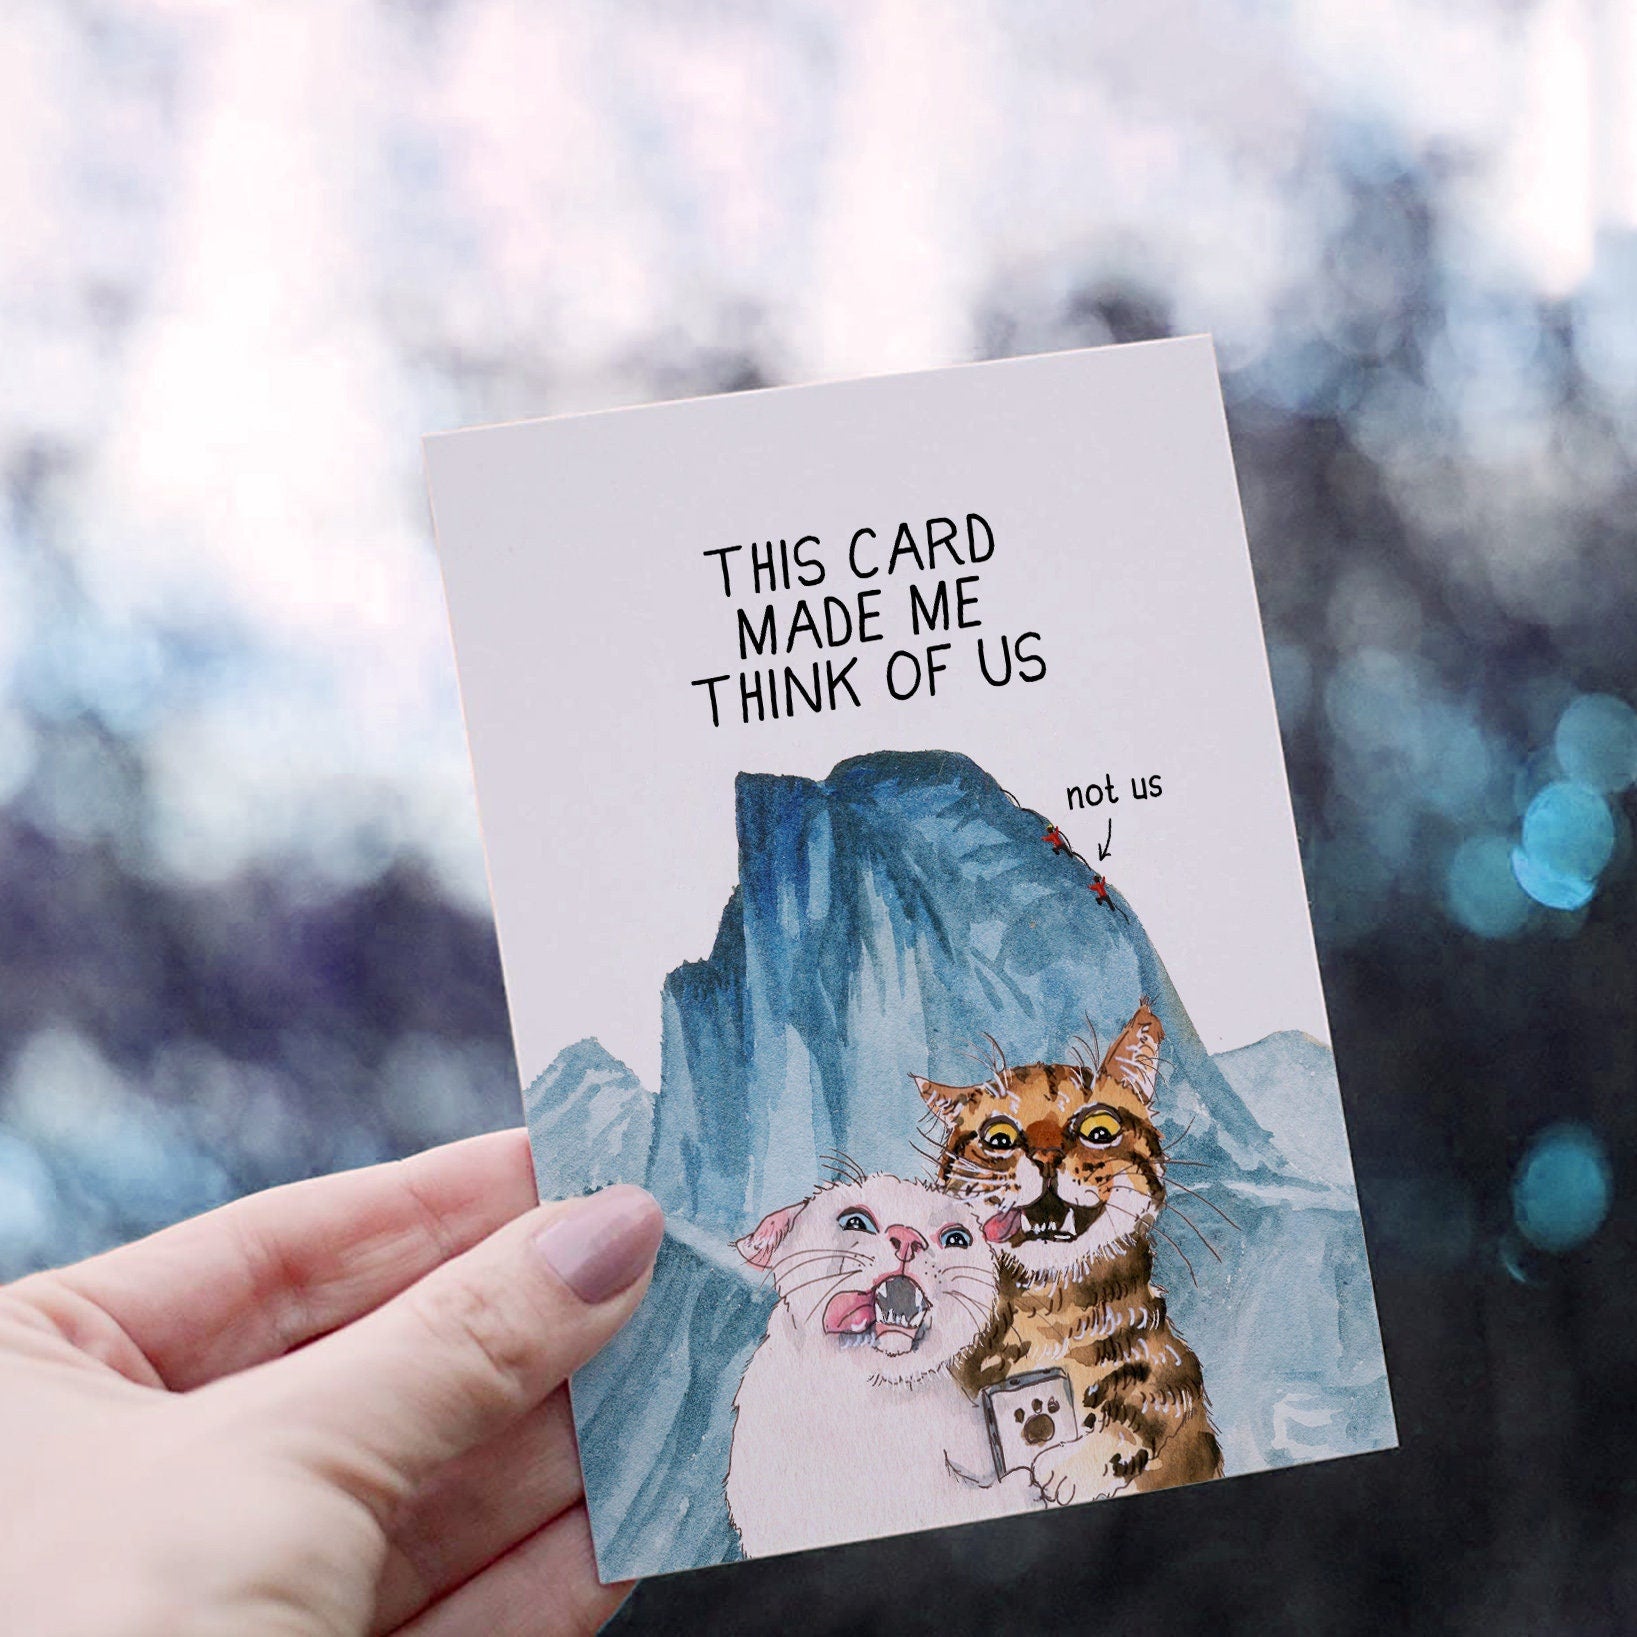 Adventure Funny Anniversary Card For Boyfriend - Funny Birthday Card For Best Friend - Yosemite National Park Travel Gifts For Parents